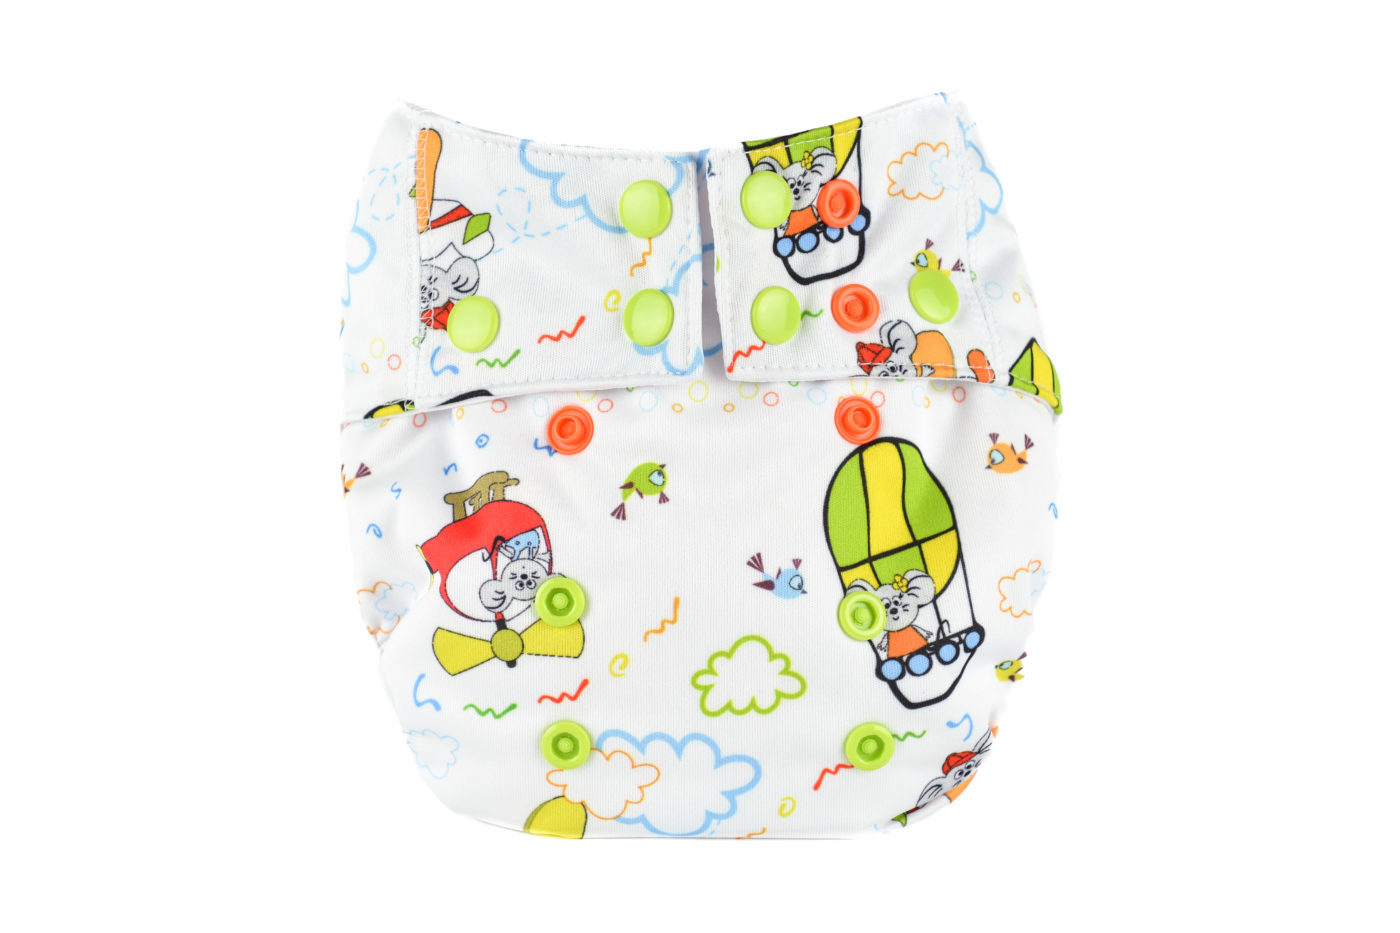 pampers pants active fit